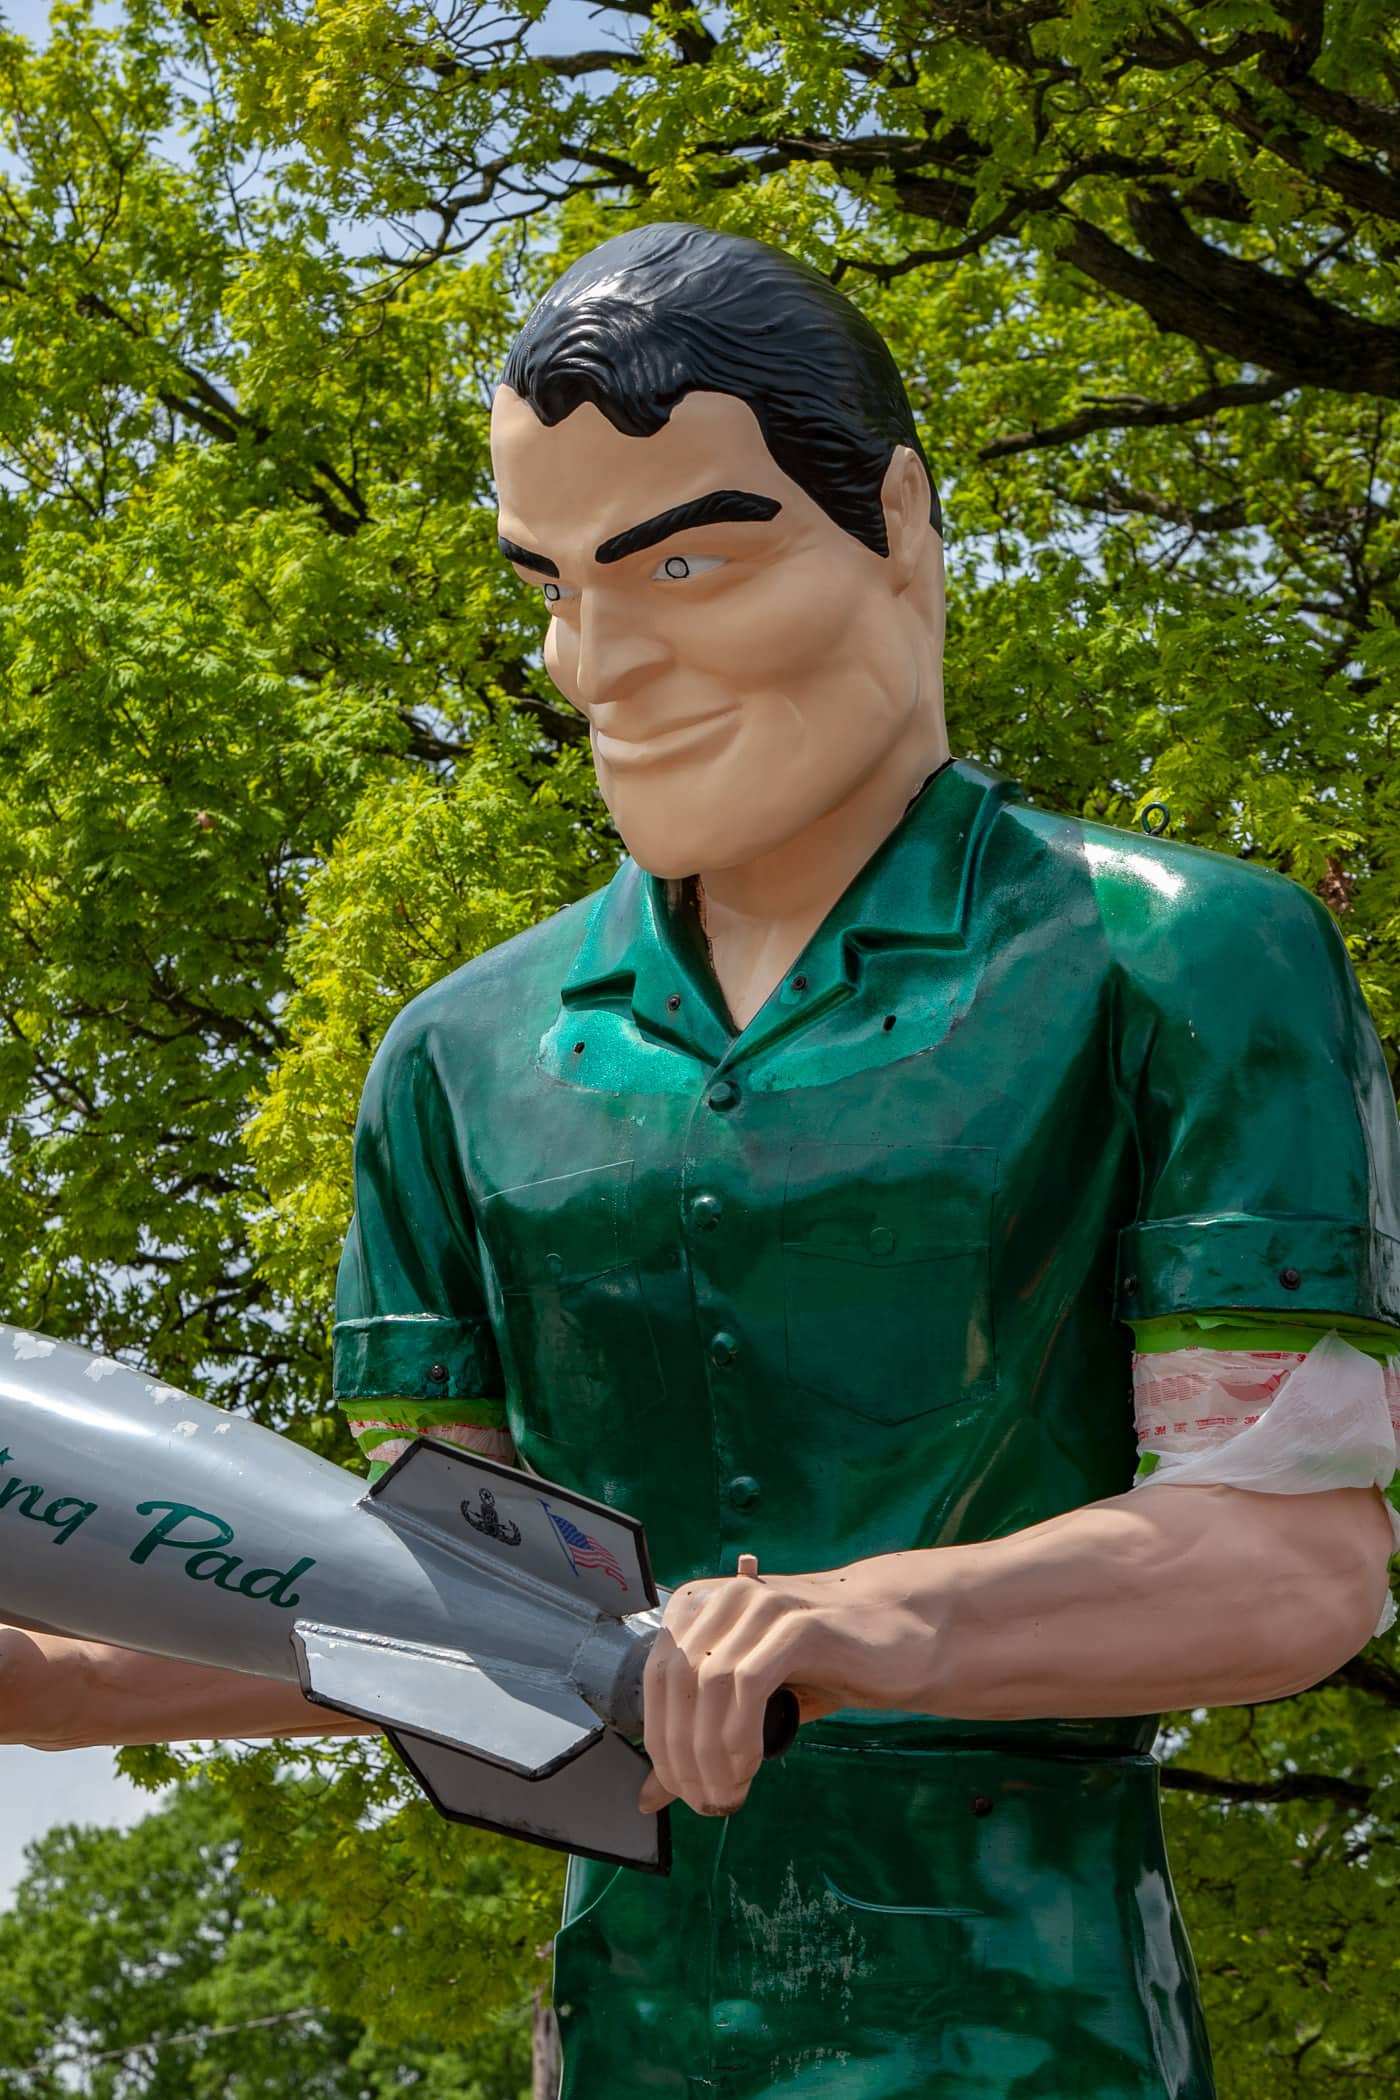 The Gemini Giant Muffler man without his helmet on at the Launching Pad Drive In in Wilmington, Illinois on Route 66.